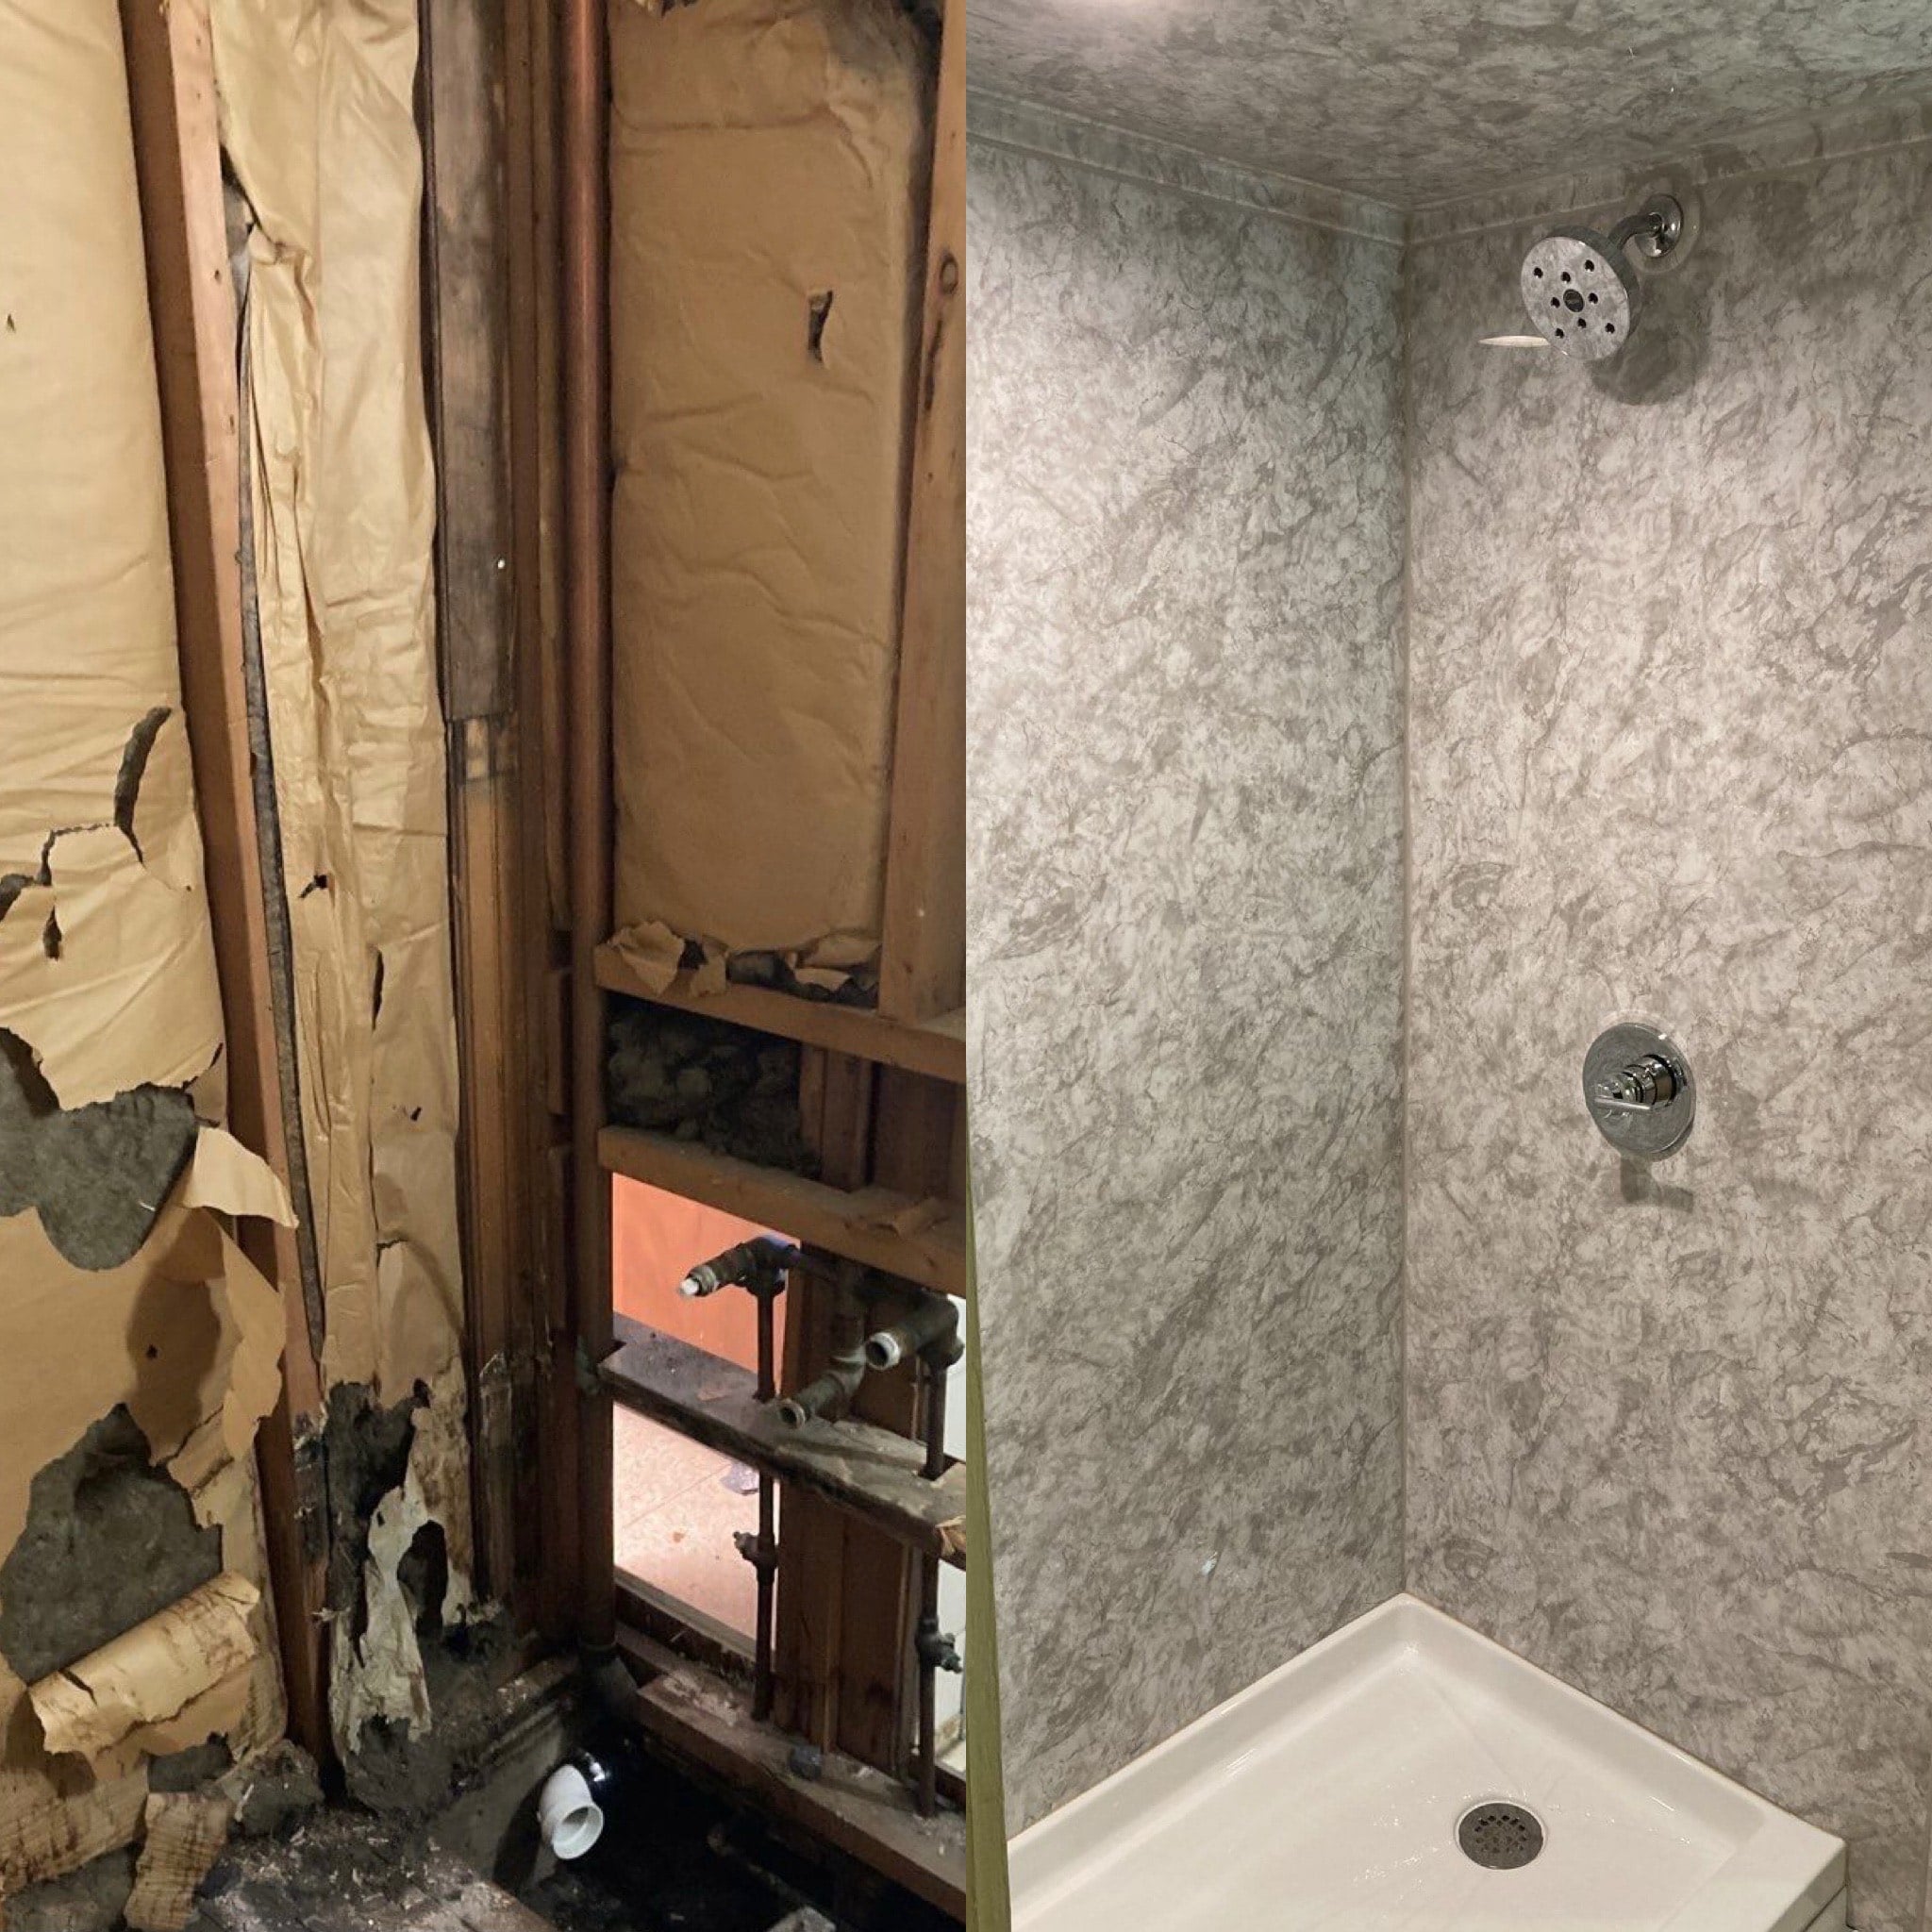 Before and After Walk-In Shower